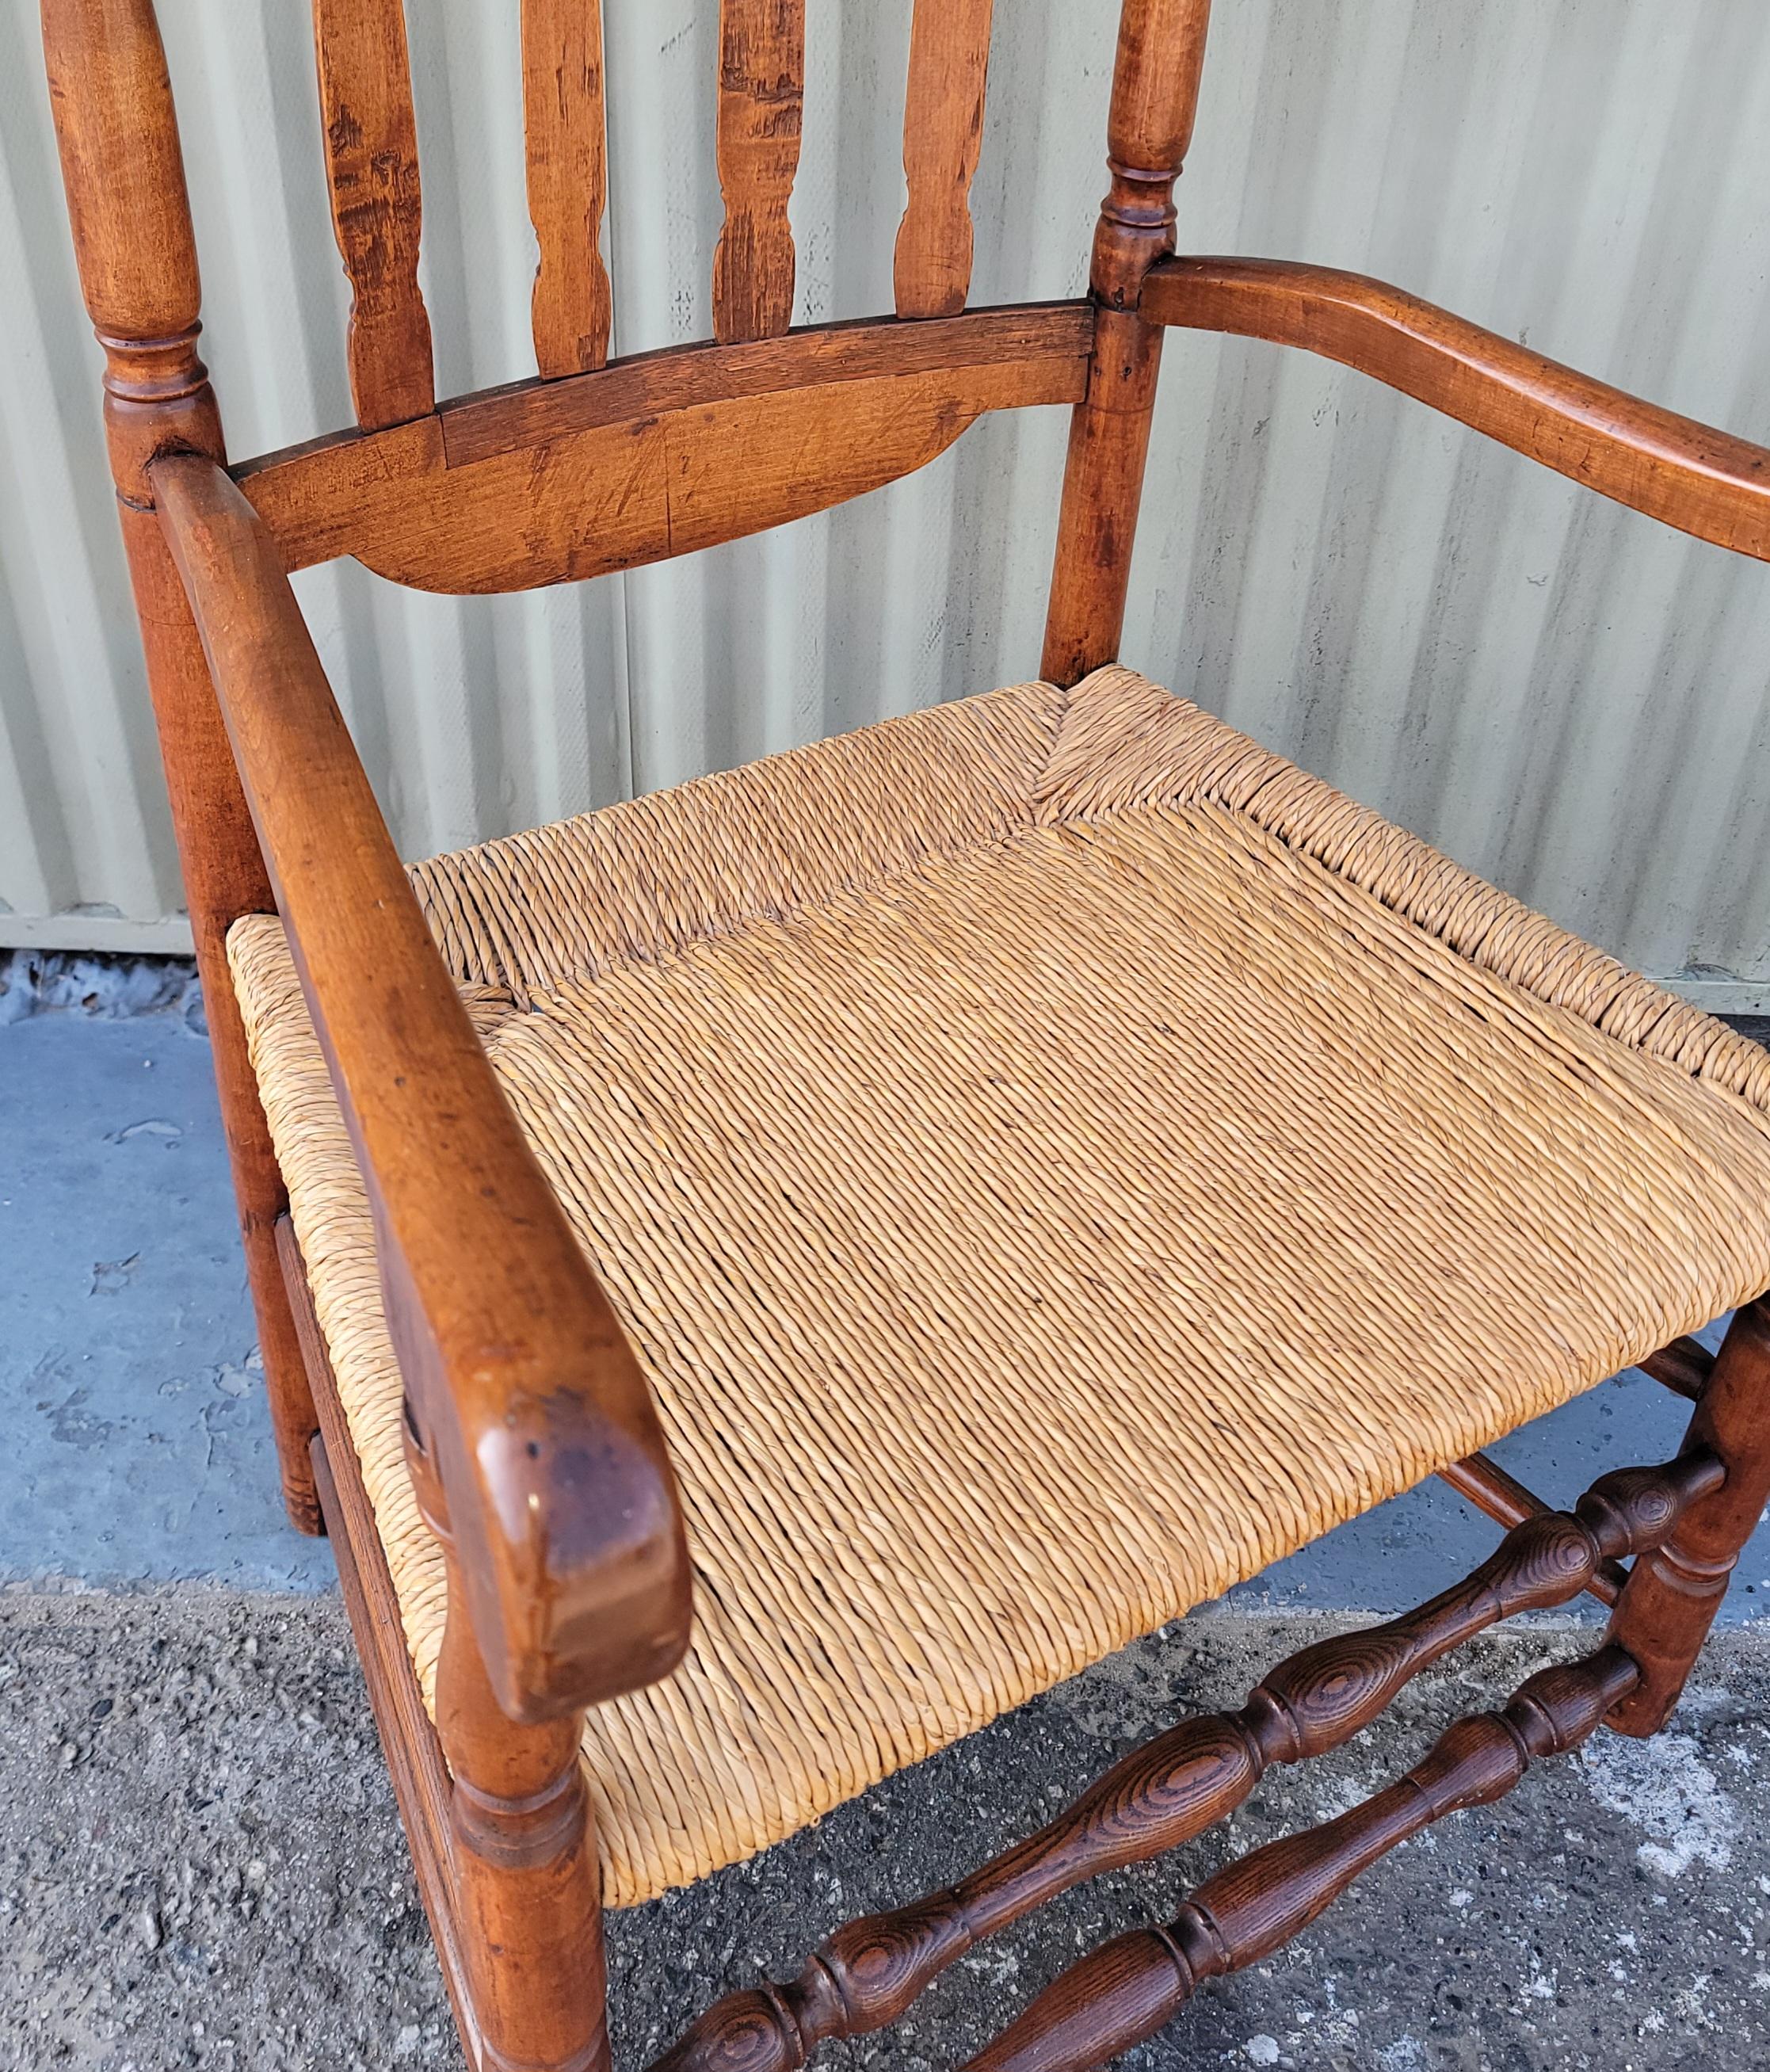 18Thc Banister back chair from New England with hand woven early seat .The condition is very good and sturdy.